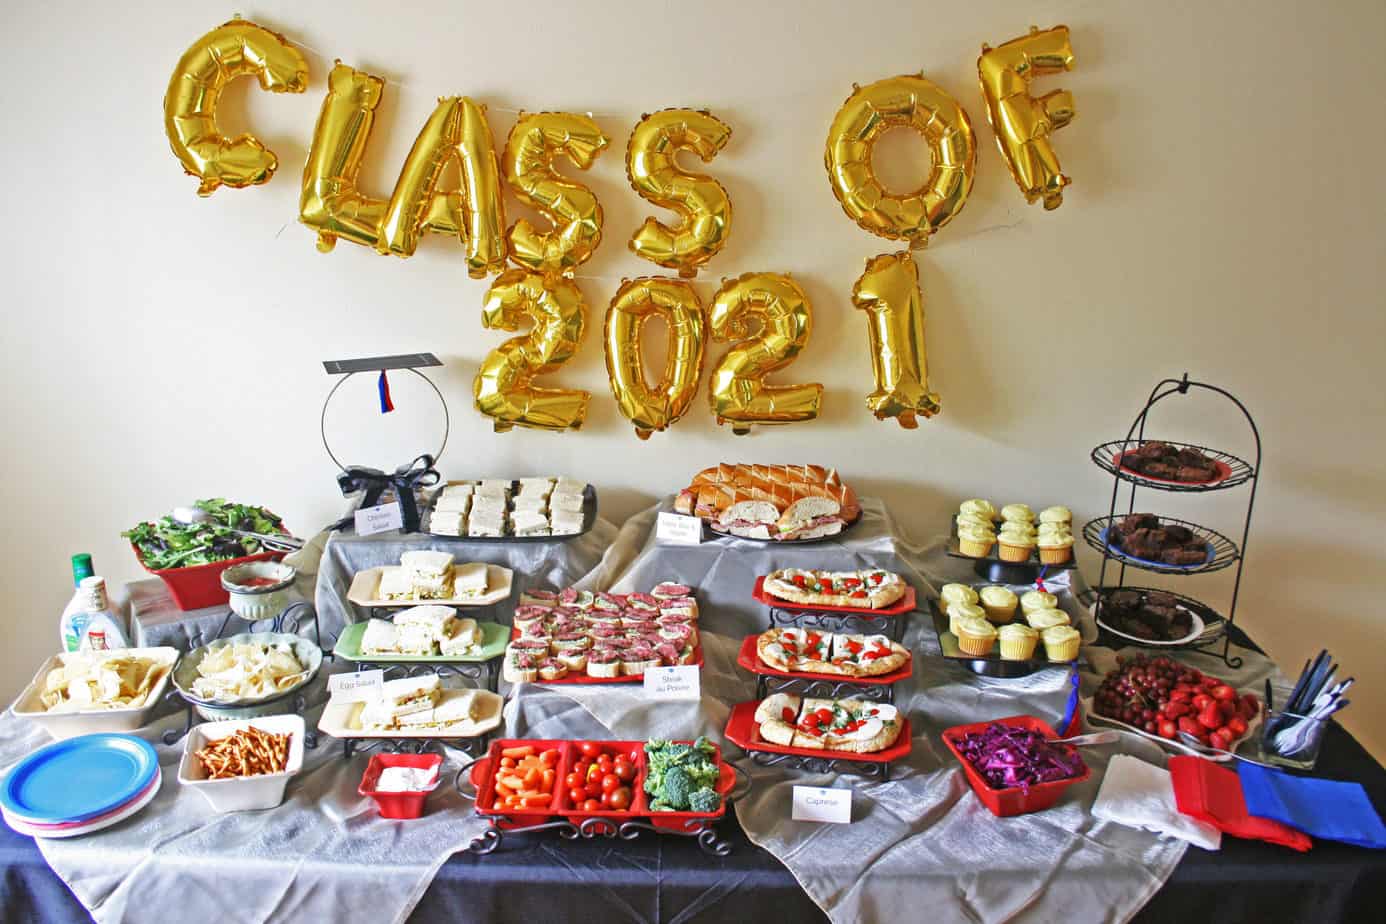 Graduation buffet table with elevated food, a graduation cap centerpiece and Class of 2021 sign.